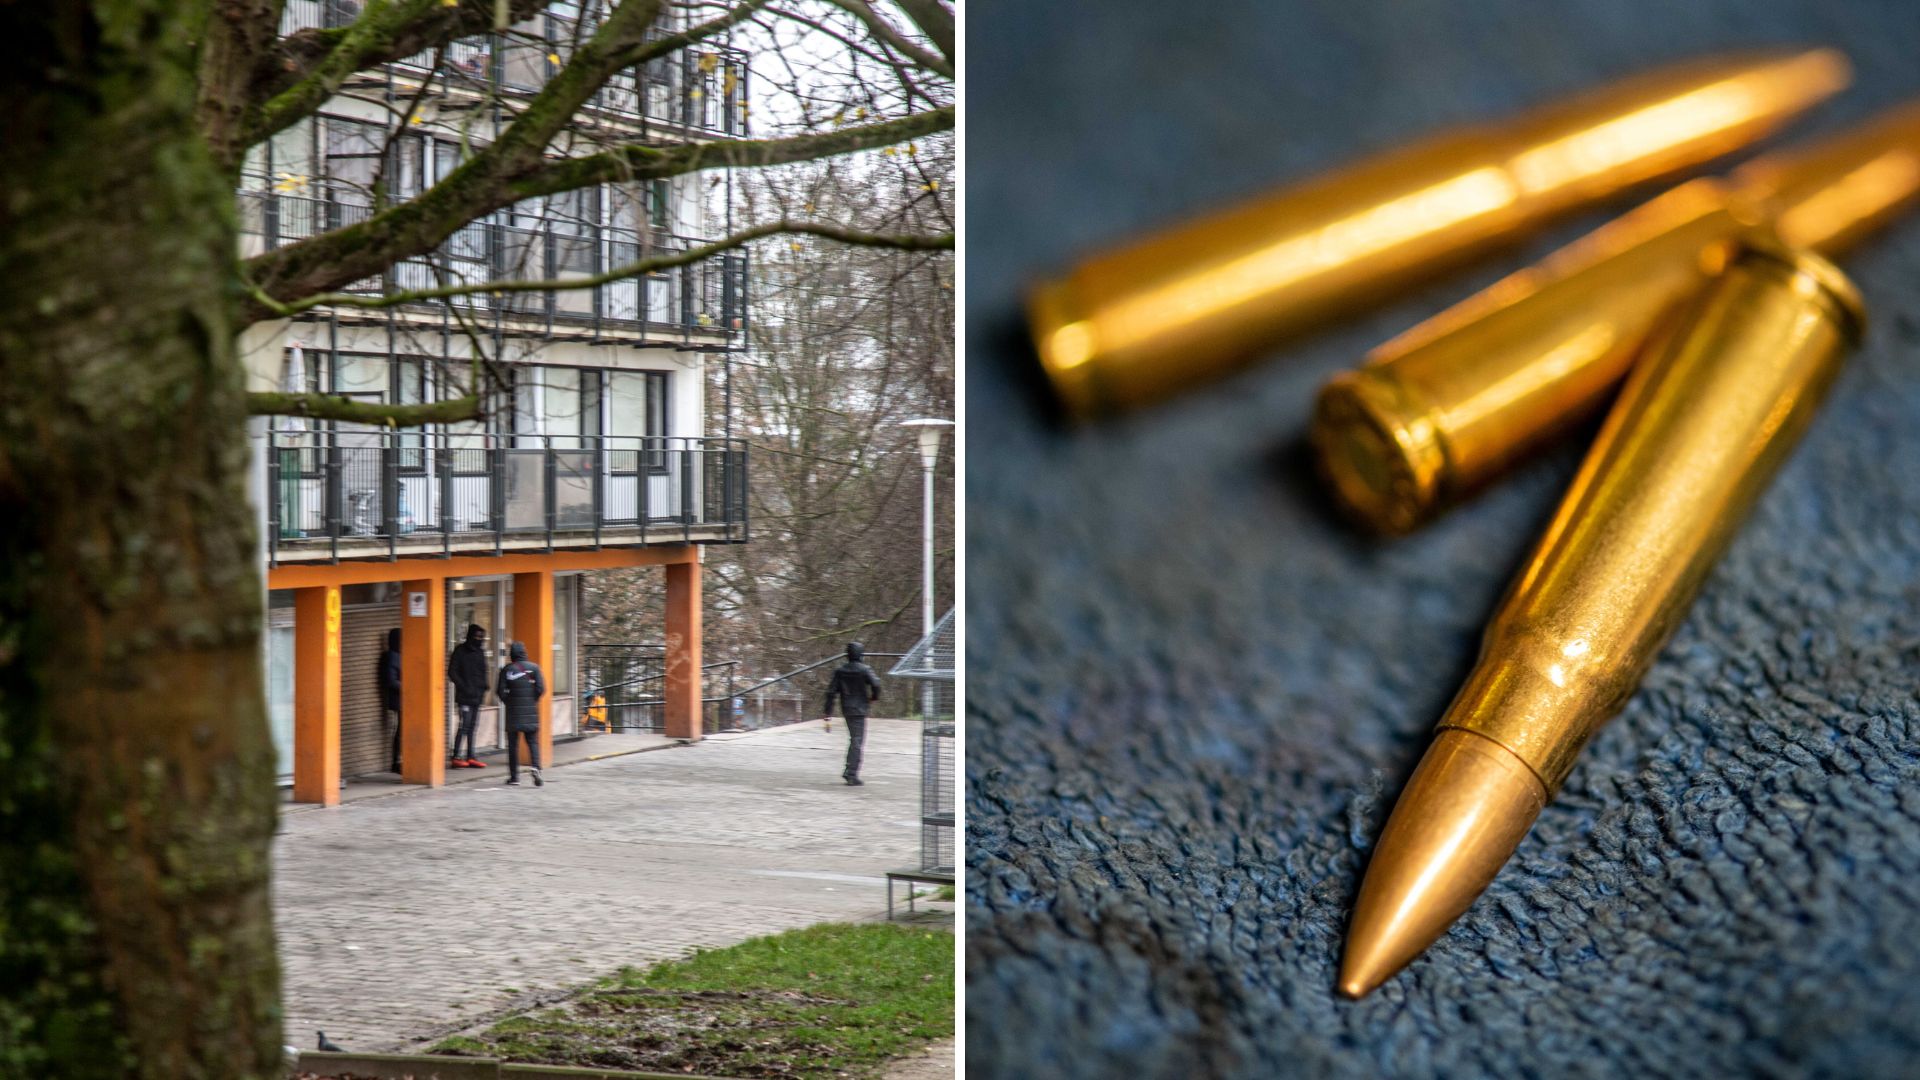 Turf wars in Brussels: Surging drug violence fuelled by new gang feud